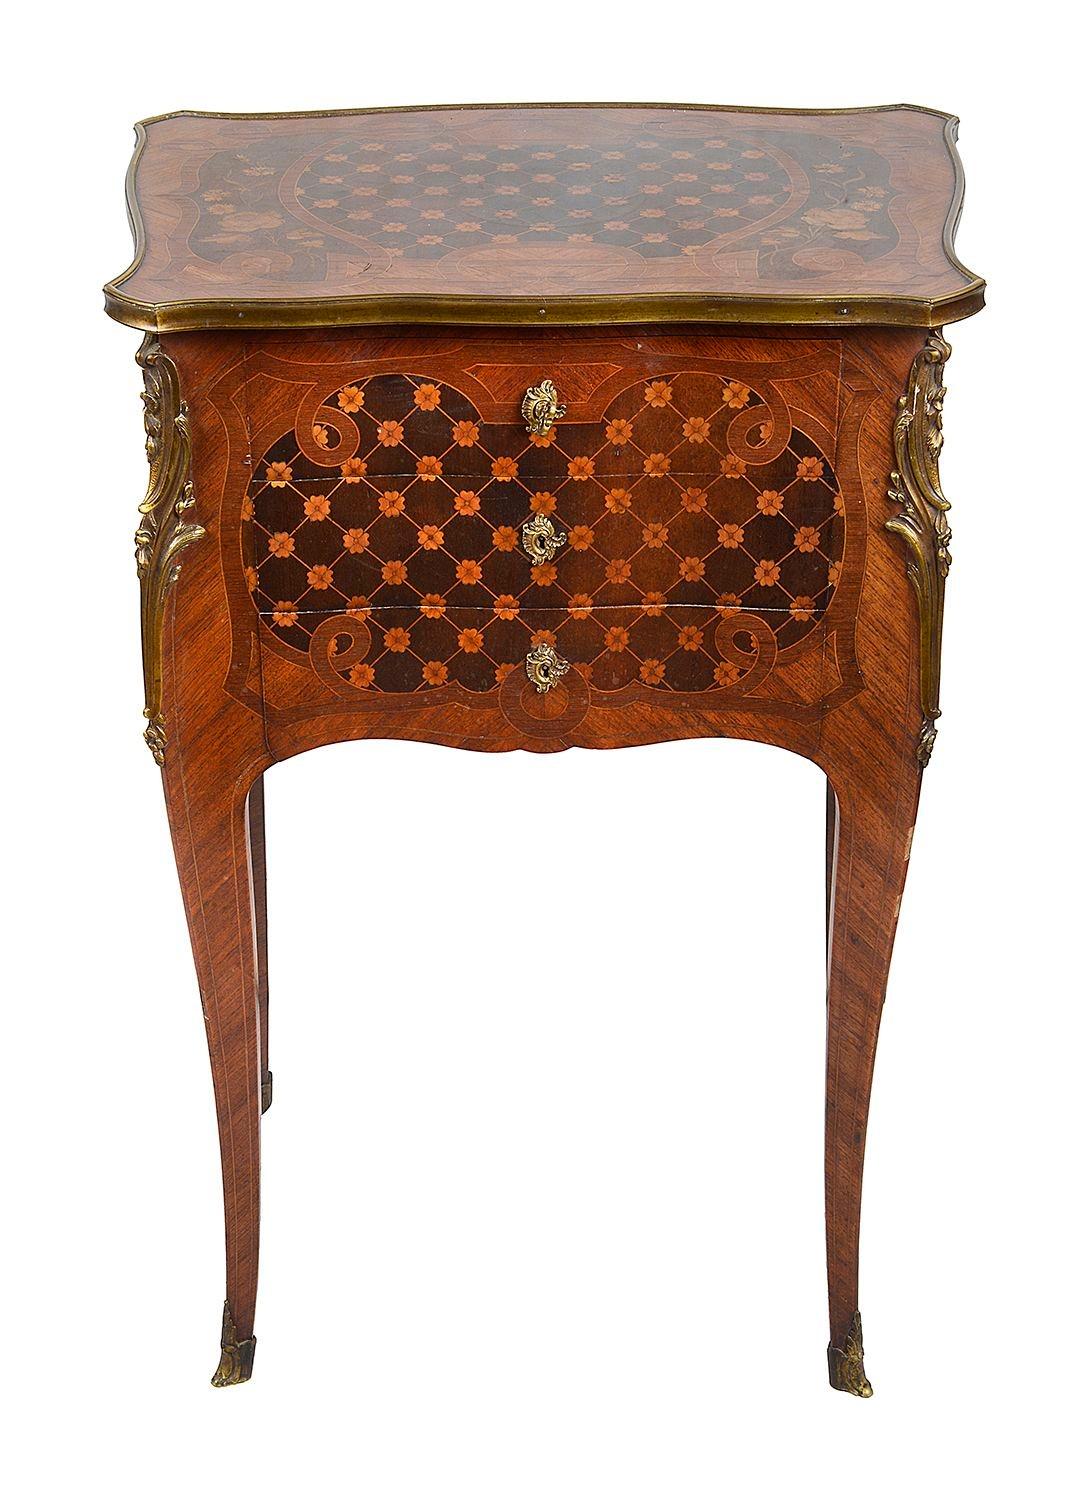 Fine quality late 19th Century French marquetry inlaid side table, having three serpentine fronted drawers, raised on elegant cabriole legs, ormolu mounted. Signed to the lock; Somani.
Batch 77 62612 DNSKZ

Signed; Paul Sormani (1817-1877), one the